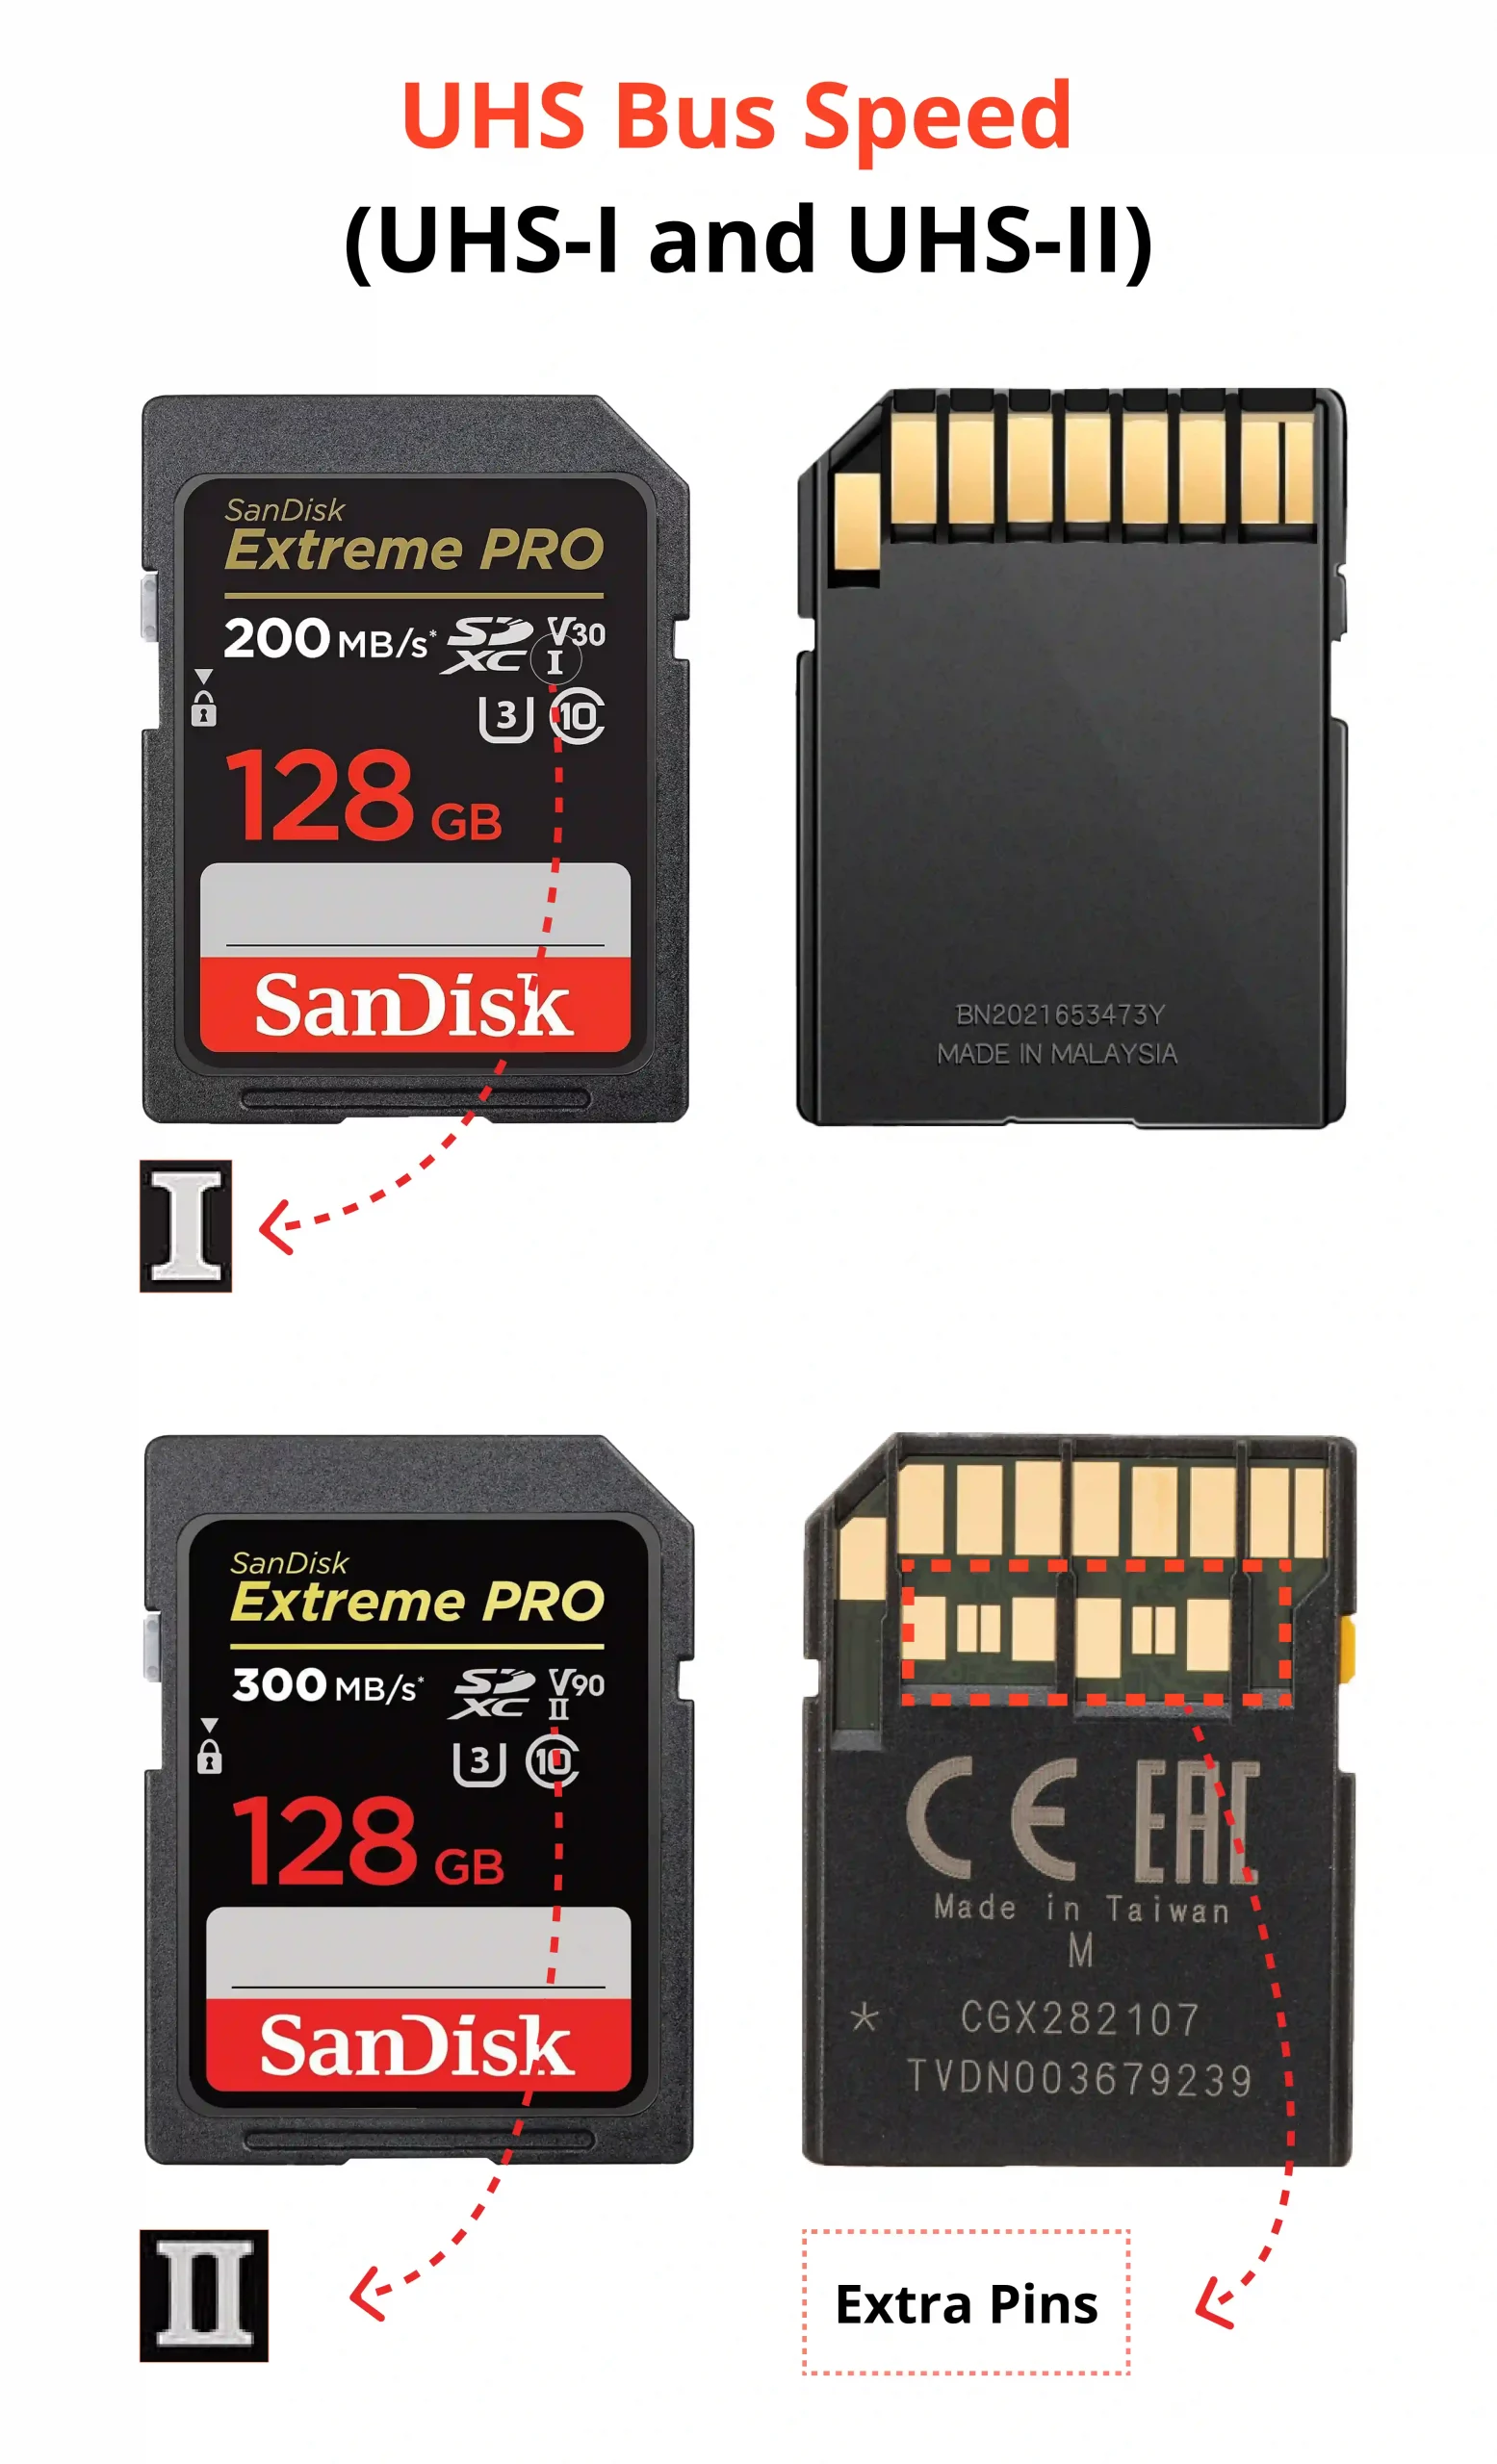 Symbols on SD Cards and their meaning